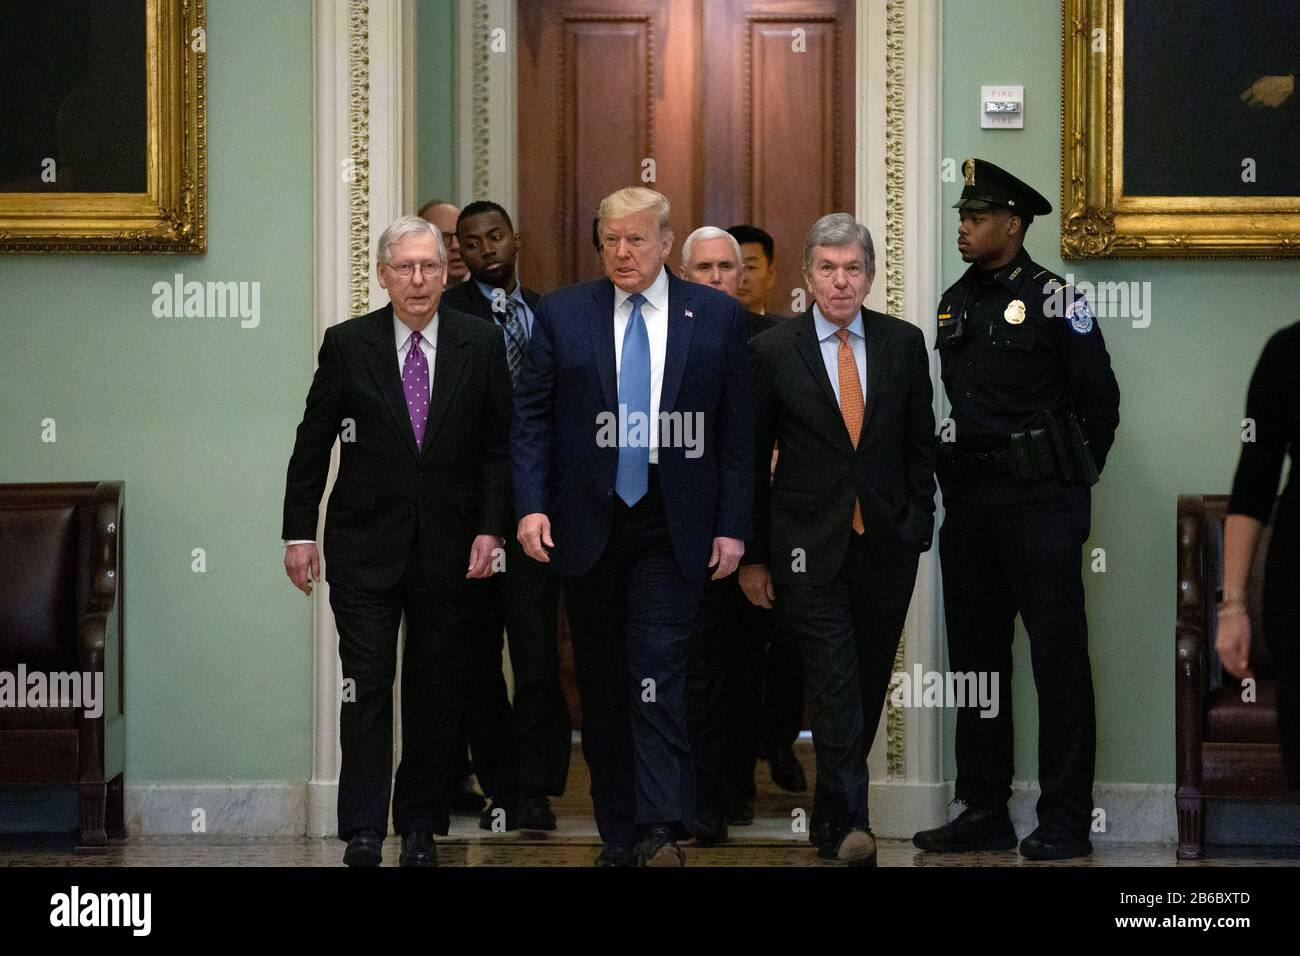 United States President Donald J. Trump, along with White House Director of Legislative Affairs Eric Ueland, United States Secretary of the Treasury Steven T. Mnuchin, and United States Vice President Mike Pence, are escorted by United States Senate Majority Leader Mitch McConnell (Republican of Kentucky) and United States Senator Roy Blunt (Republican of Missouri) to Republican Policy Luncheons at the United States Capitol in Washington D.C., U.S., on Tuesday, March 10, 2020.  Credit: Stefani Reynolds / CNP/AdMedia Stock Photo